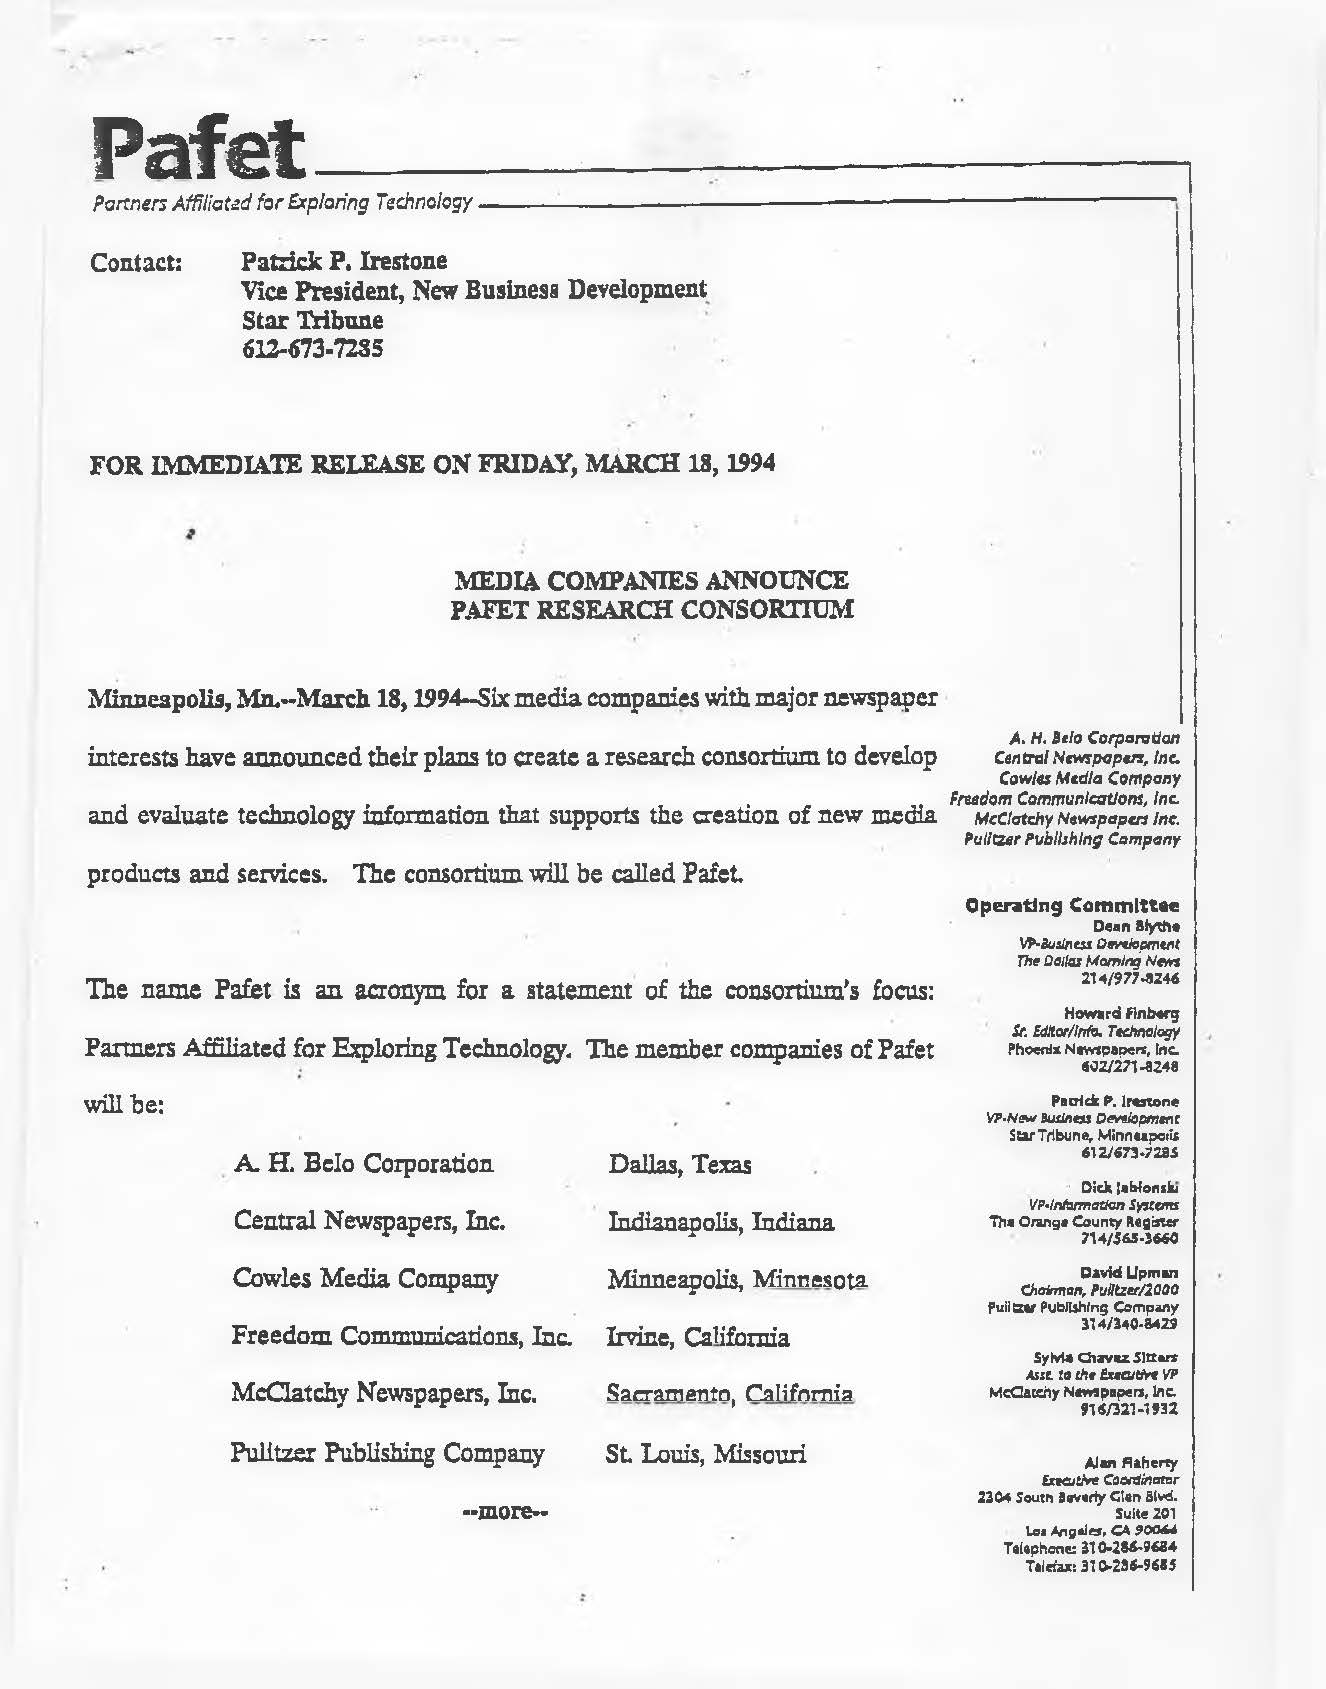 PAFET News Release 1994